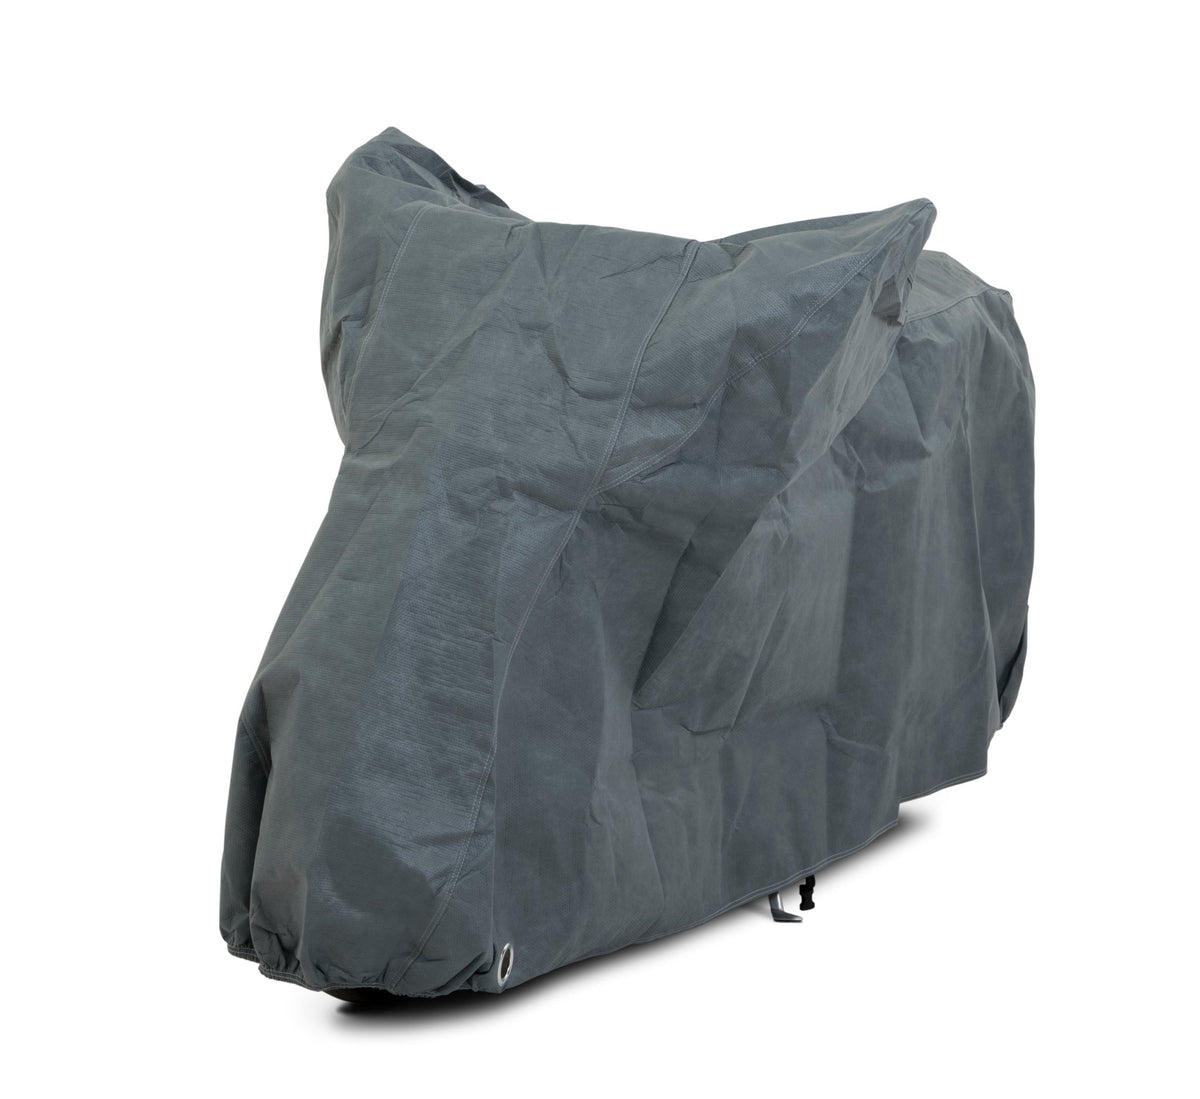 Stormforce best outdoor motorcycle covers for HARLEY DAVIDSON - Storm Motorcycle Covers